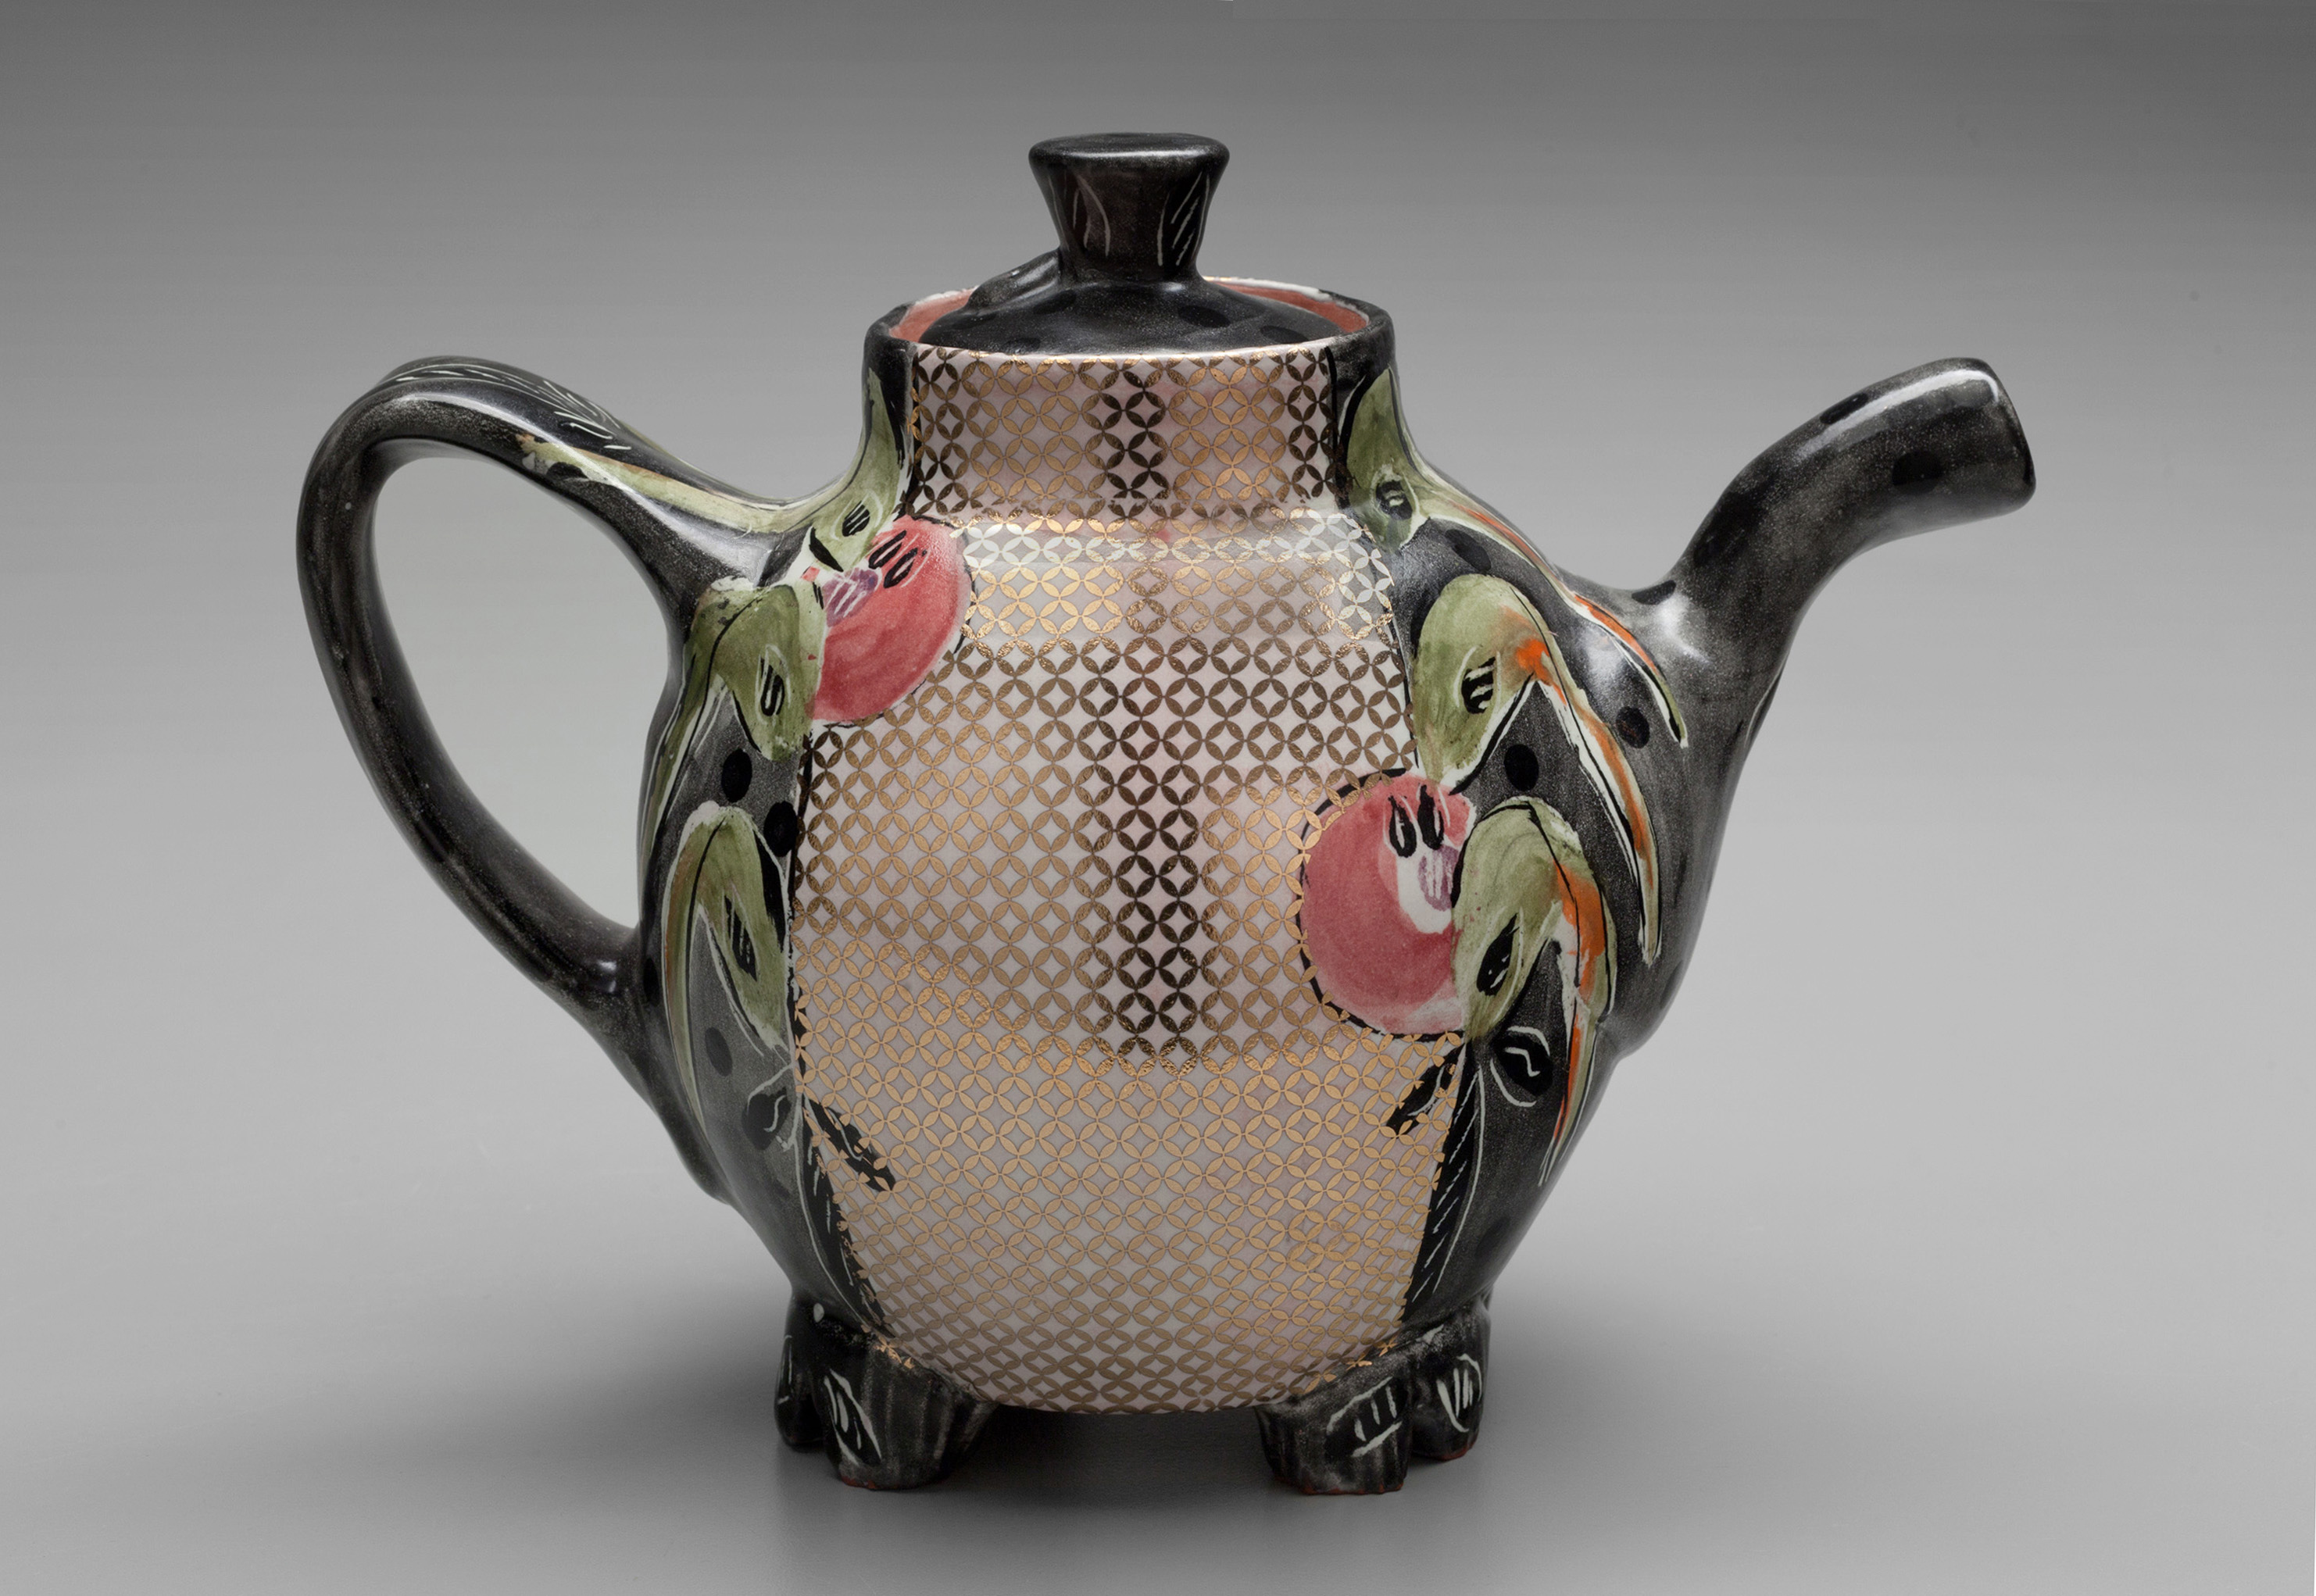 Posey Bacopoulos’ oval teapot, 9 in. (23 cm)in height, terra cotta, majolica, fired to cone 04 in an electric kiln, gold decals, decals, fired to cone 018, 2020.